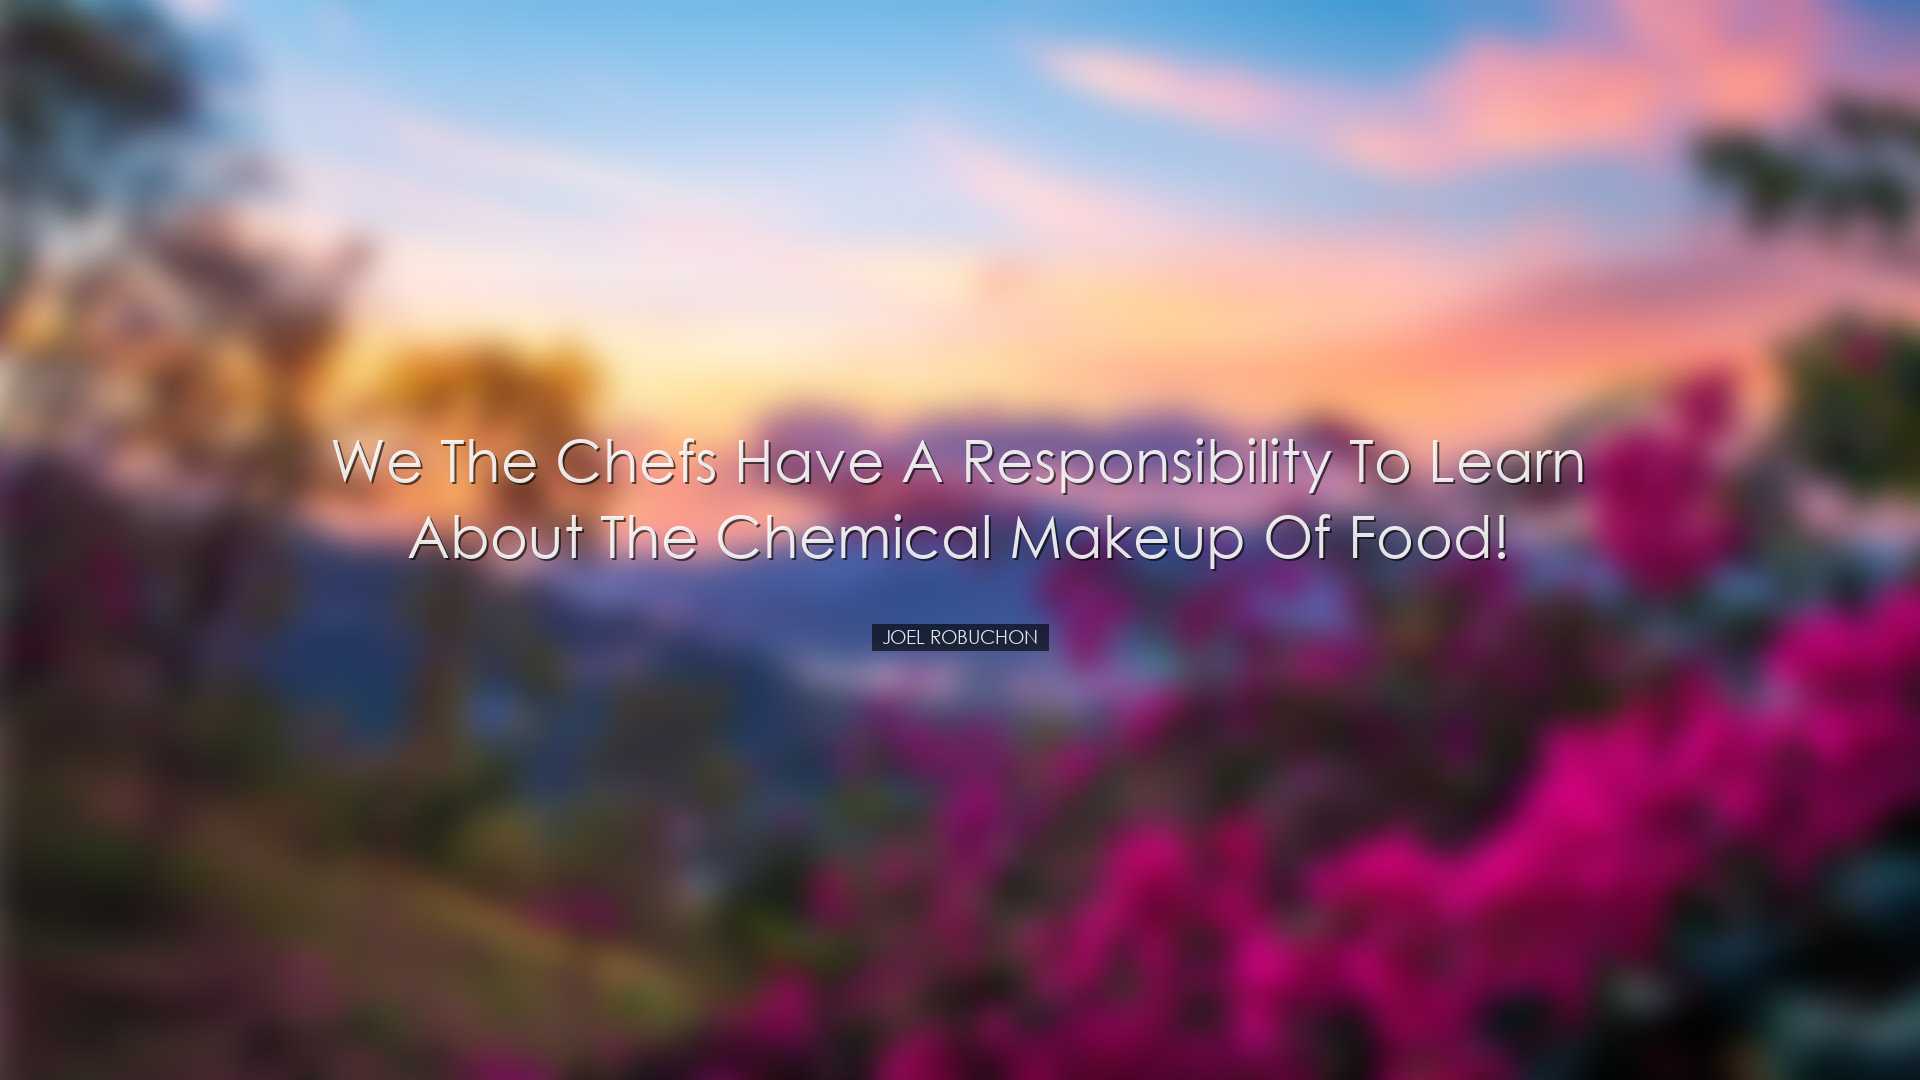 We the chefs have a responsibility to learn about the chemical mak